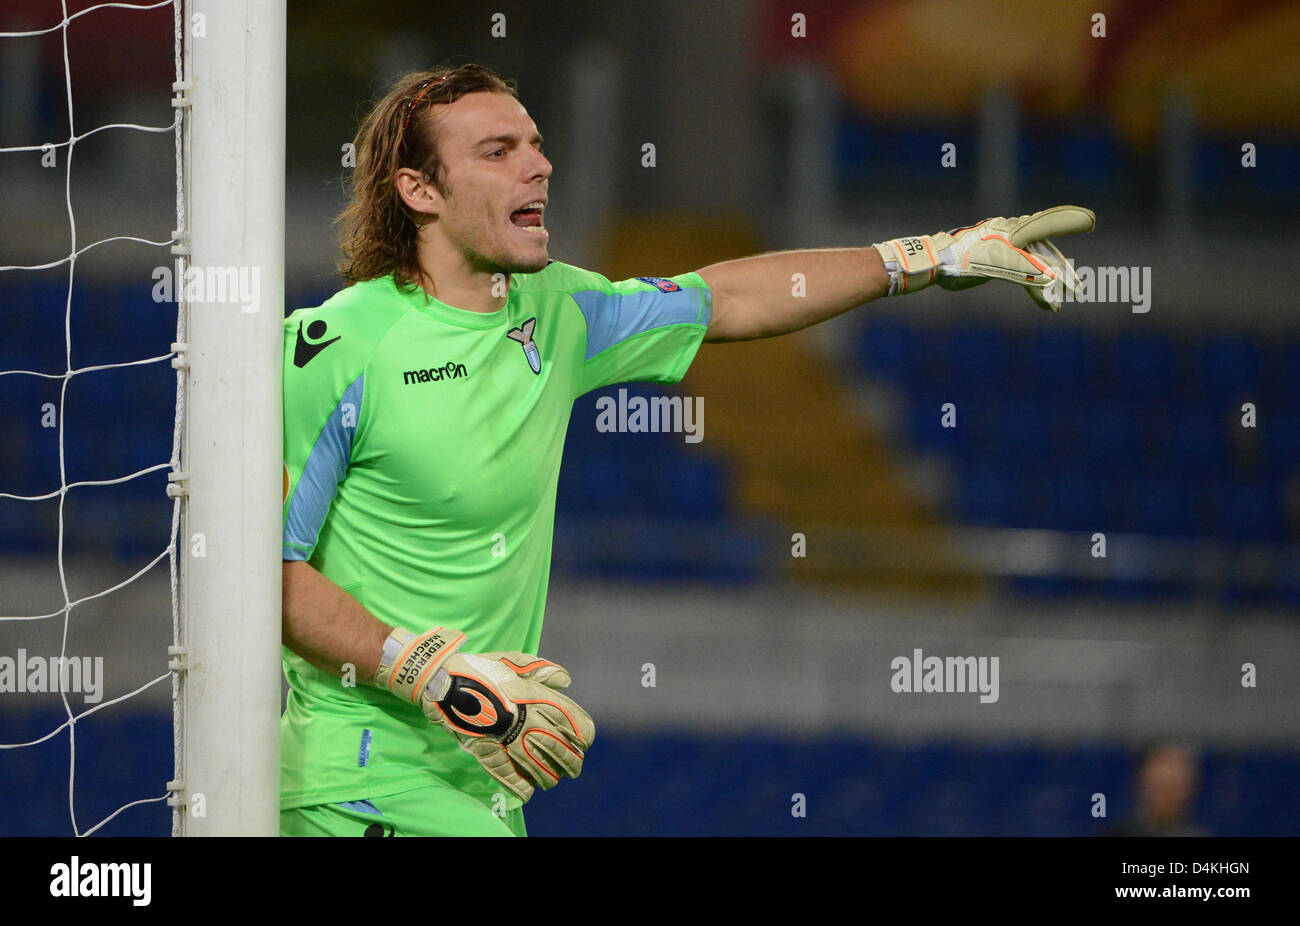 Lazio's goalkeeper Federico Marchetti reacts during the UEFA Europa League Round of 16 second leg soccer match between Lazio Rome and VfB Stuttgart at Stadio Olimpico in Rome, Italy, 14 March 2013. Foto: Marijan Murat/dpa Stock Photo